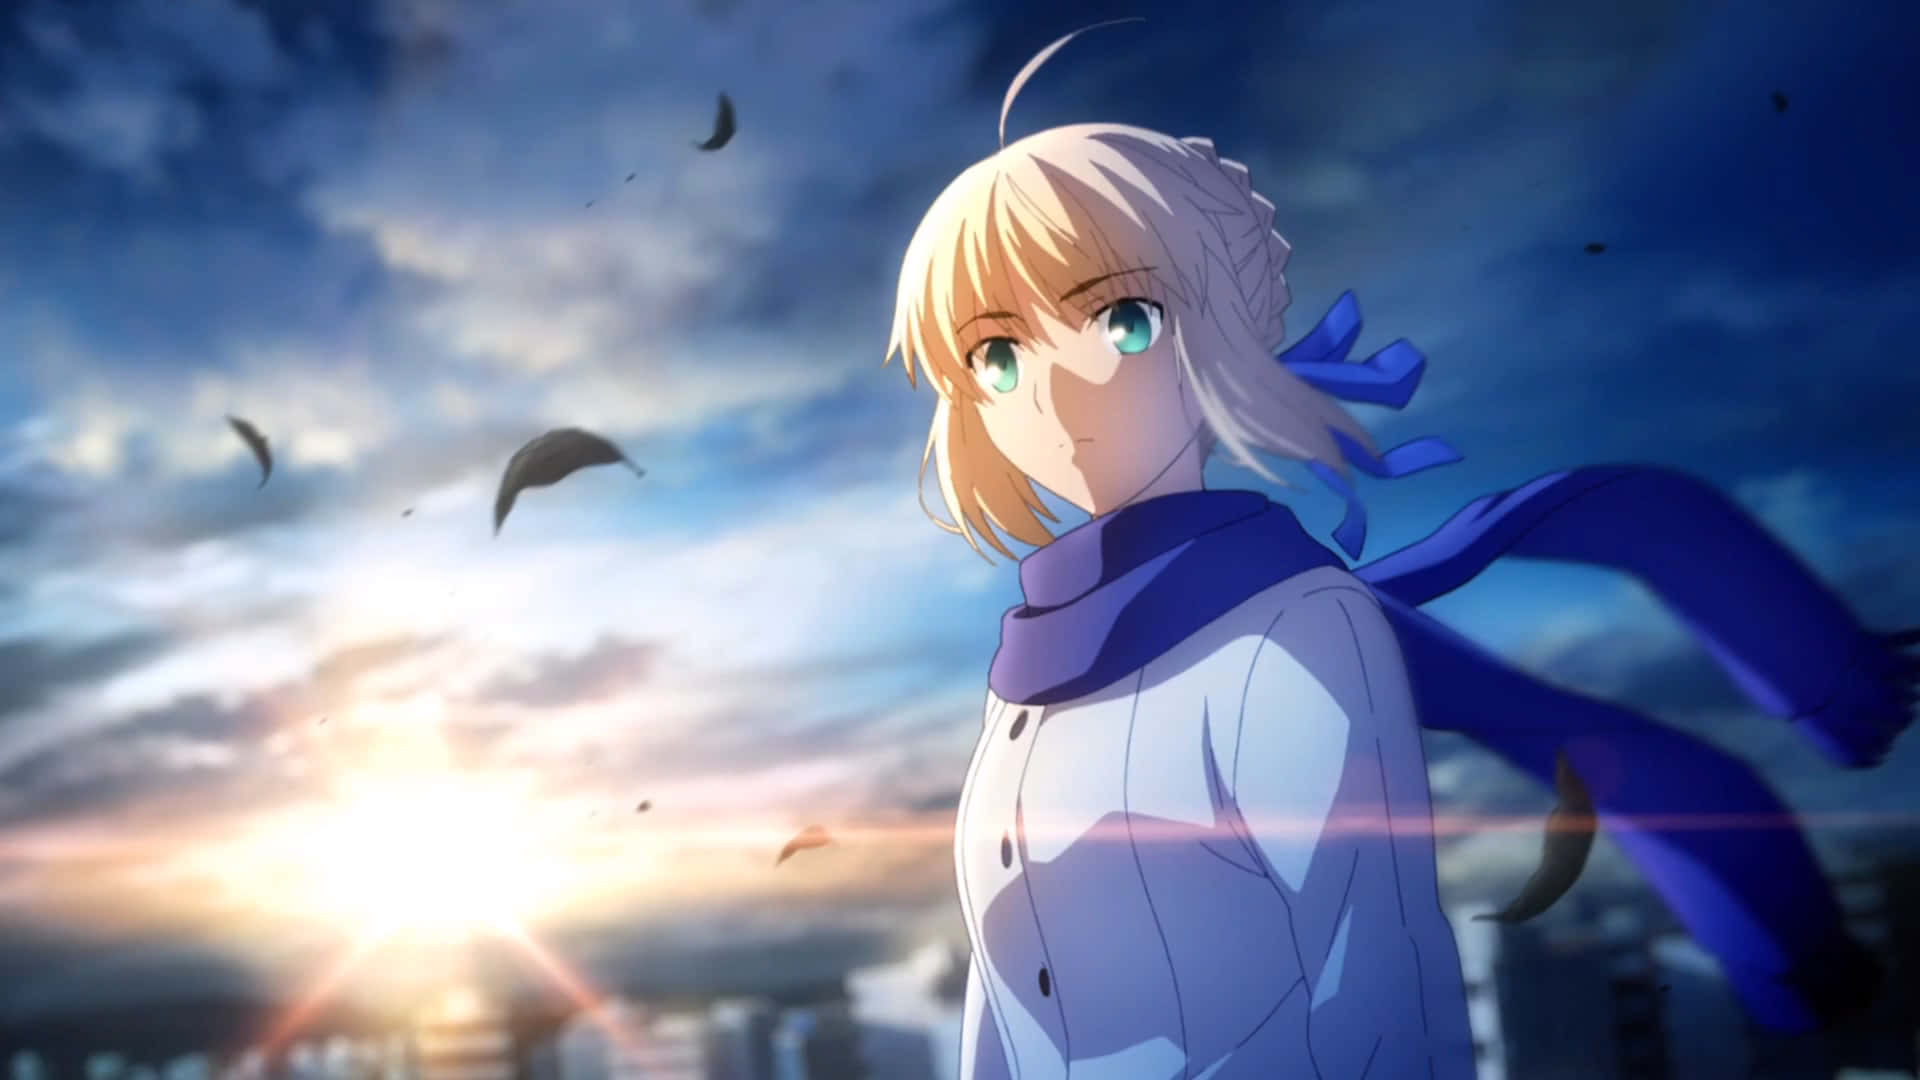 Saber Fate Stay Night With Blue Scarf Wallpaper